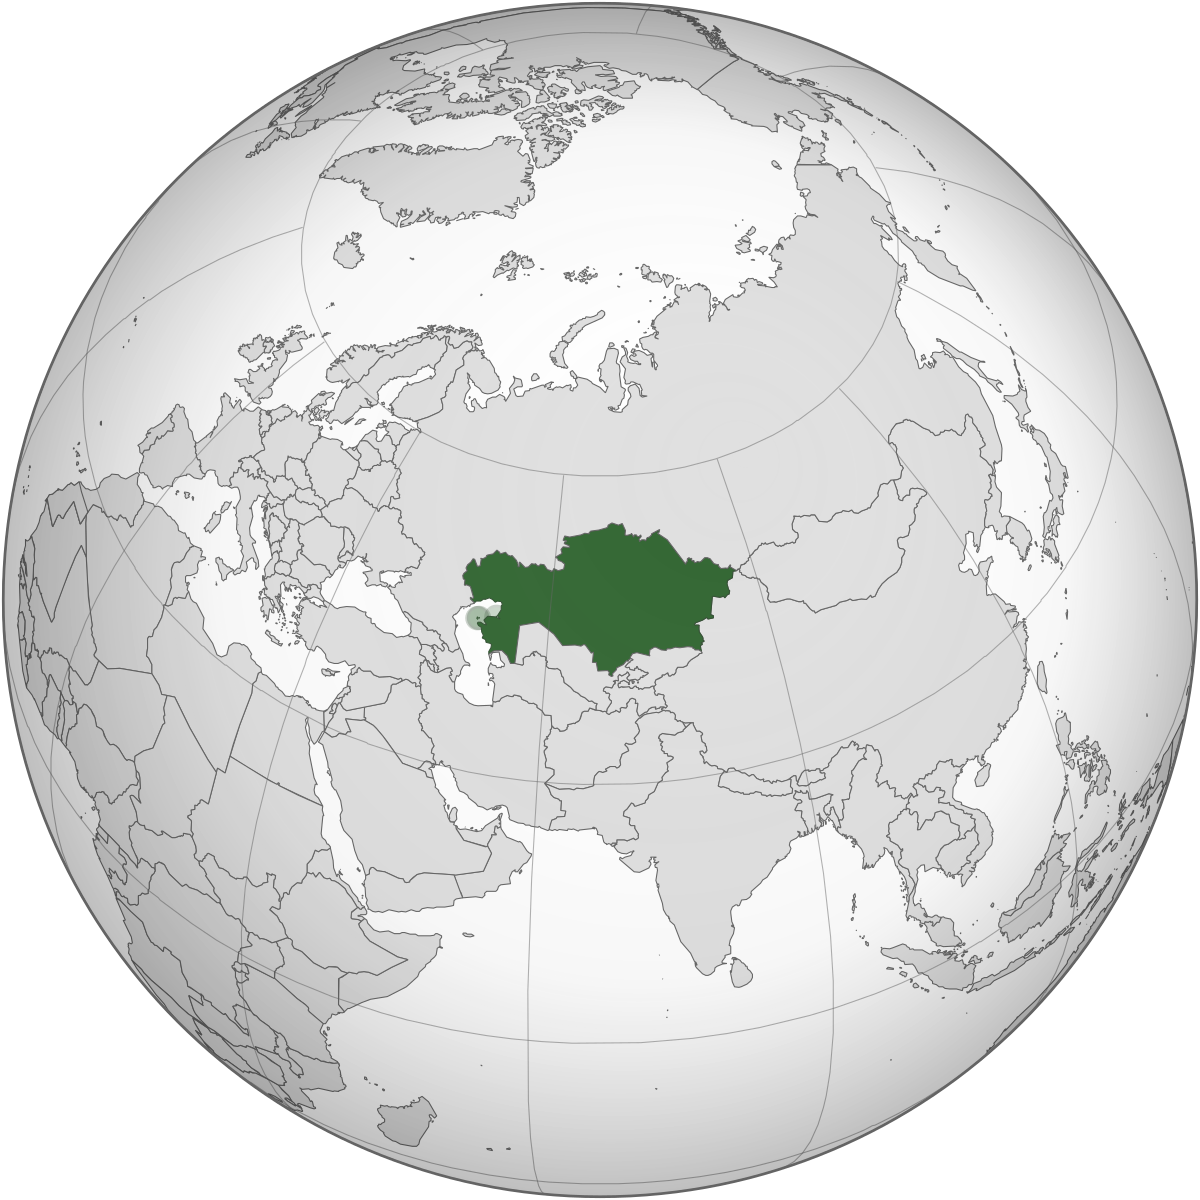 https://upload.wikimedia.org/wikipedia/commons/thumb/3/3e/Kazakhstan_%28orthographic_projection%29.svg/1200px-Kazakhstan_%28orthographic_projection%29.svg.png